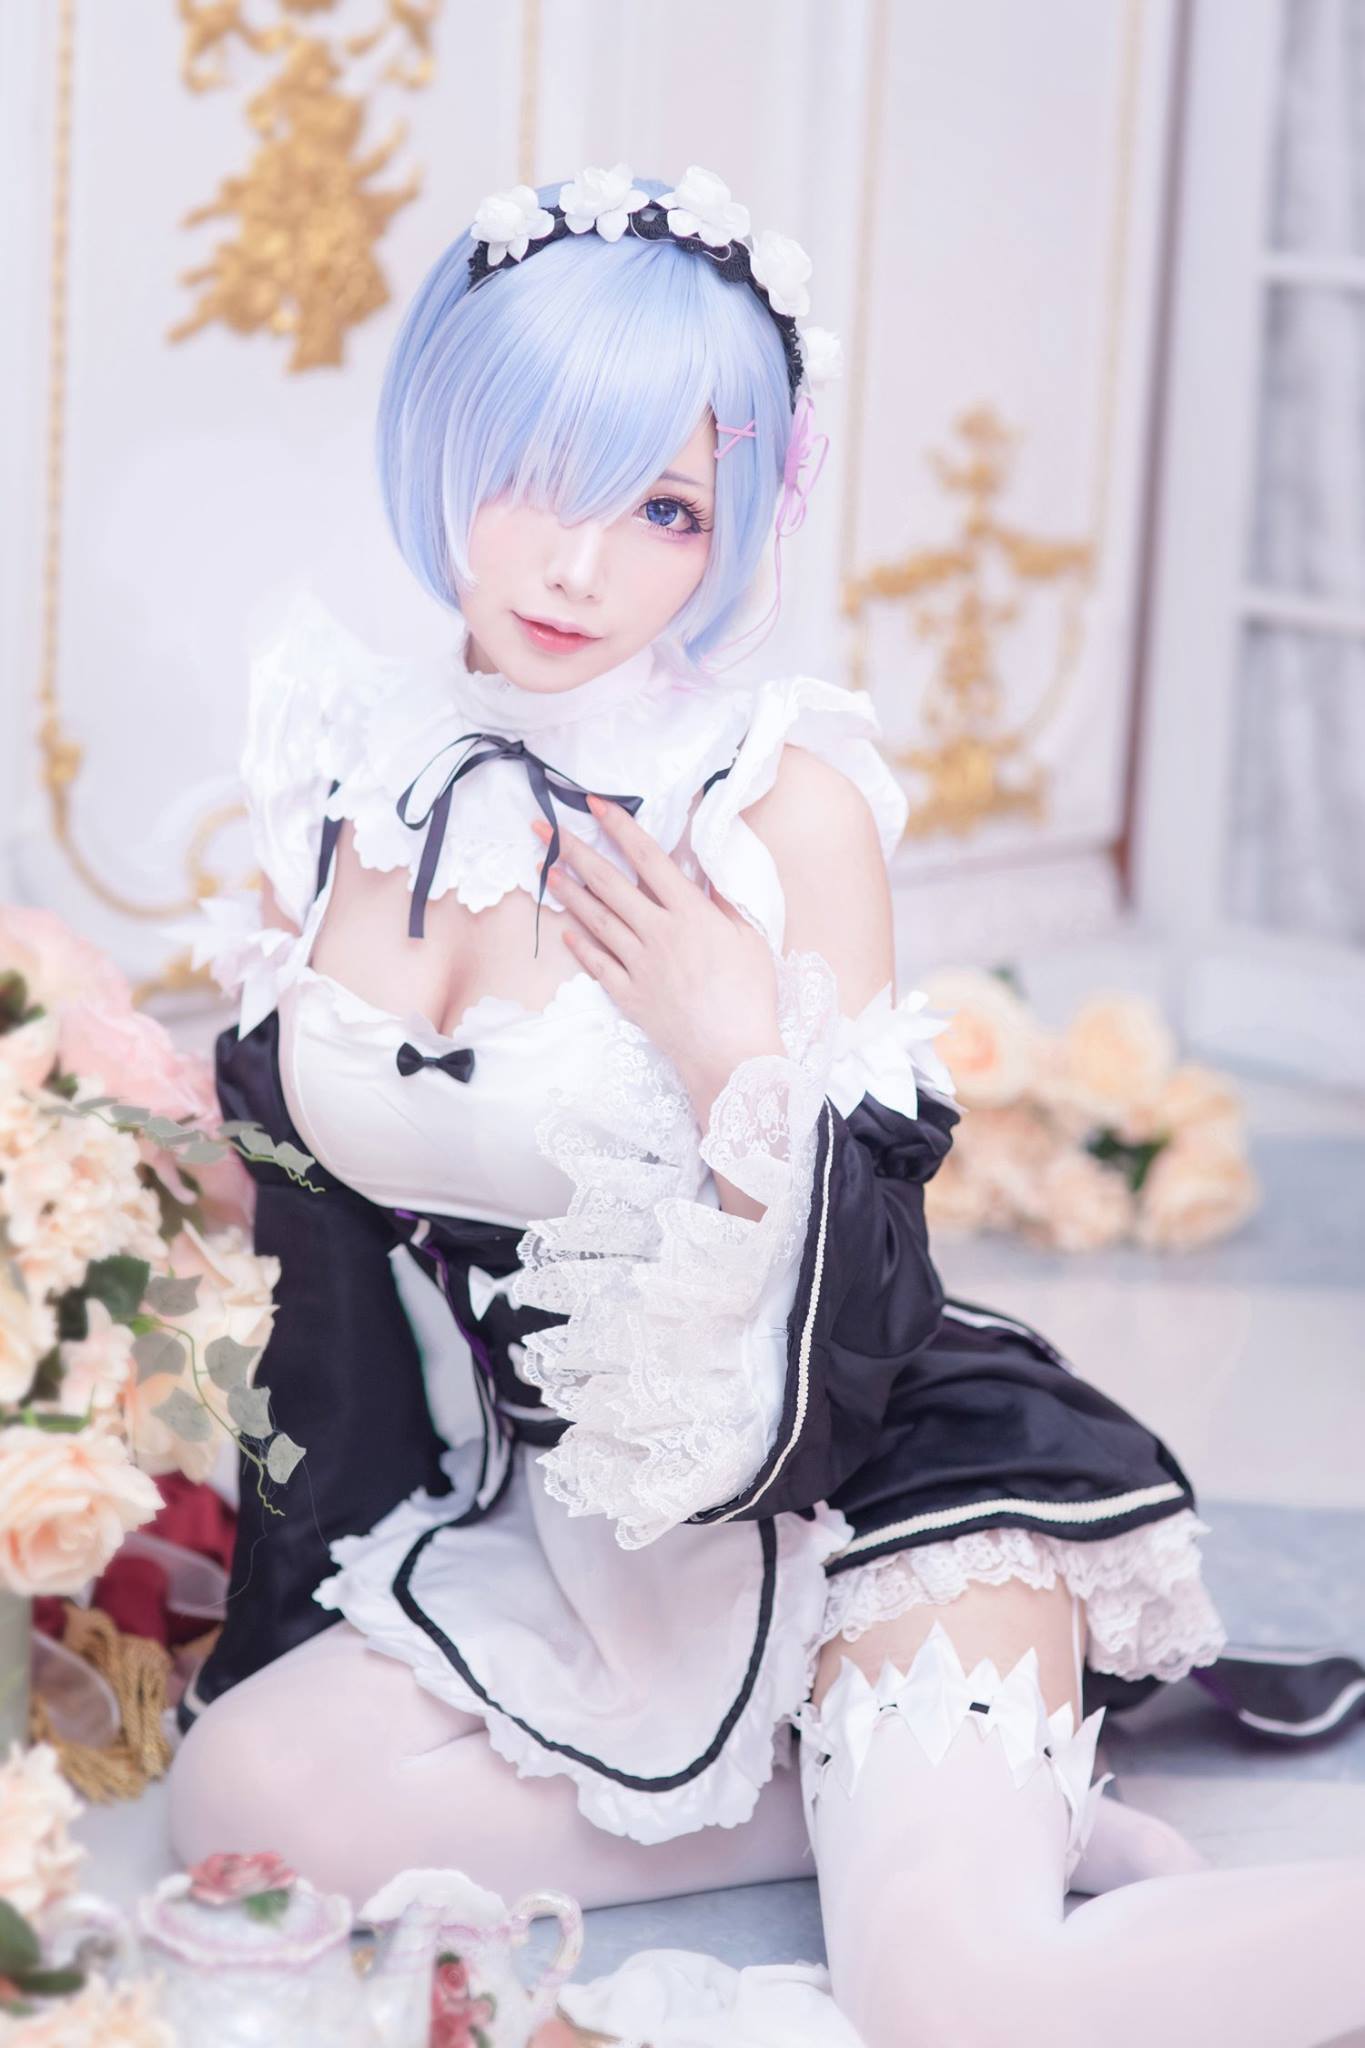 World Cosplayers: Mon From Taiwan | Cosplay Gallery | Mon as Rem from Re:Zero â Starting Life in Another World